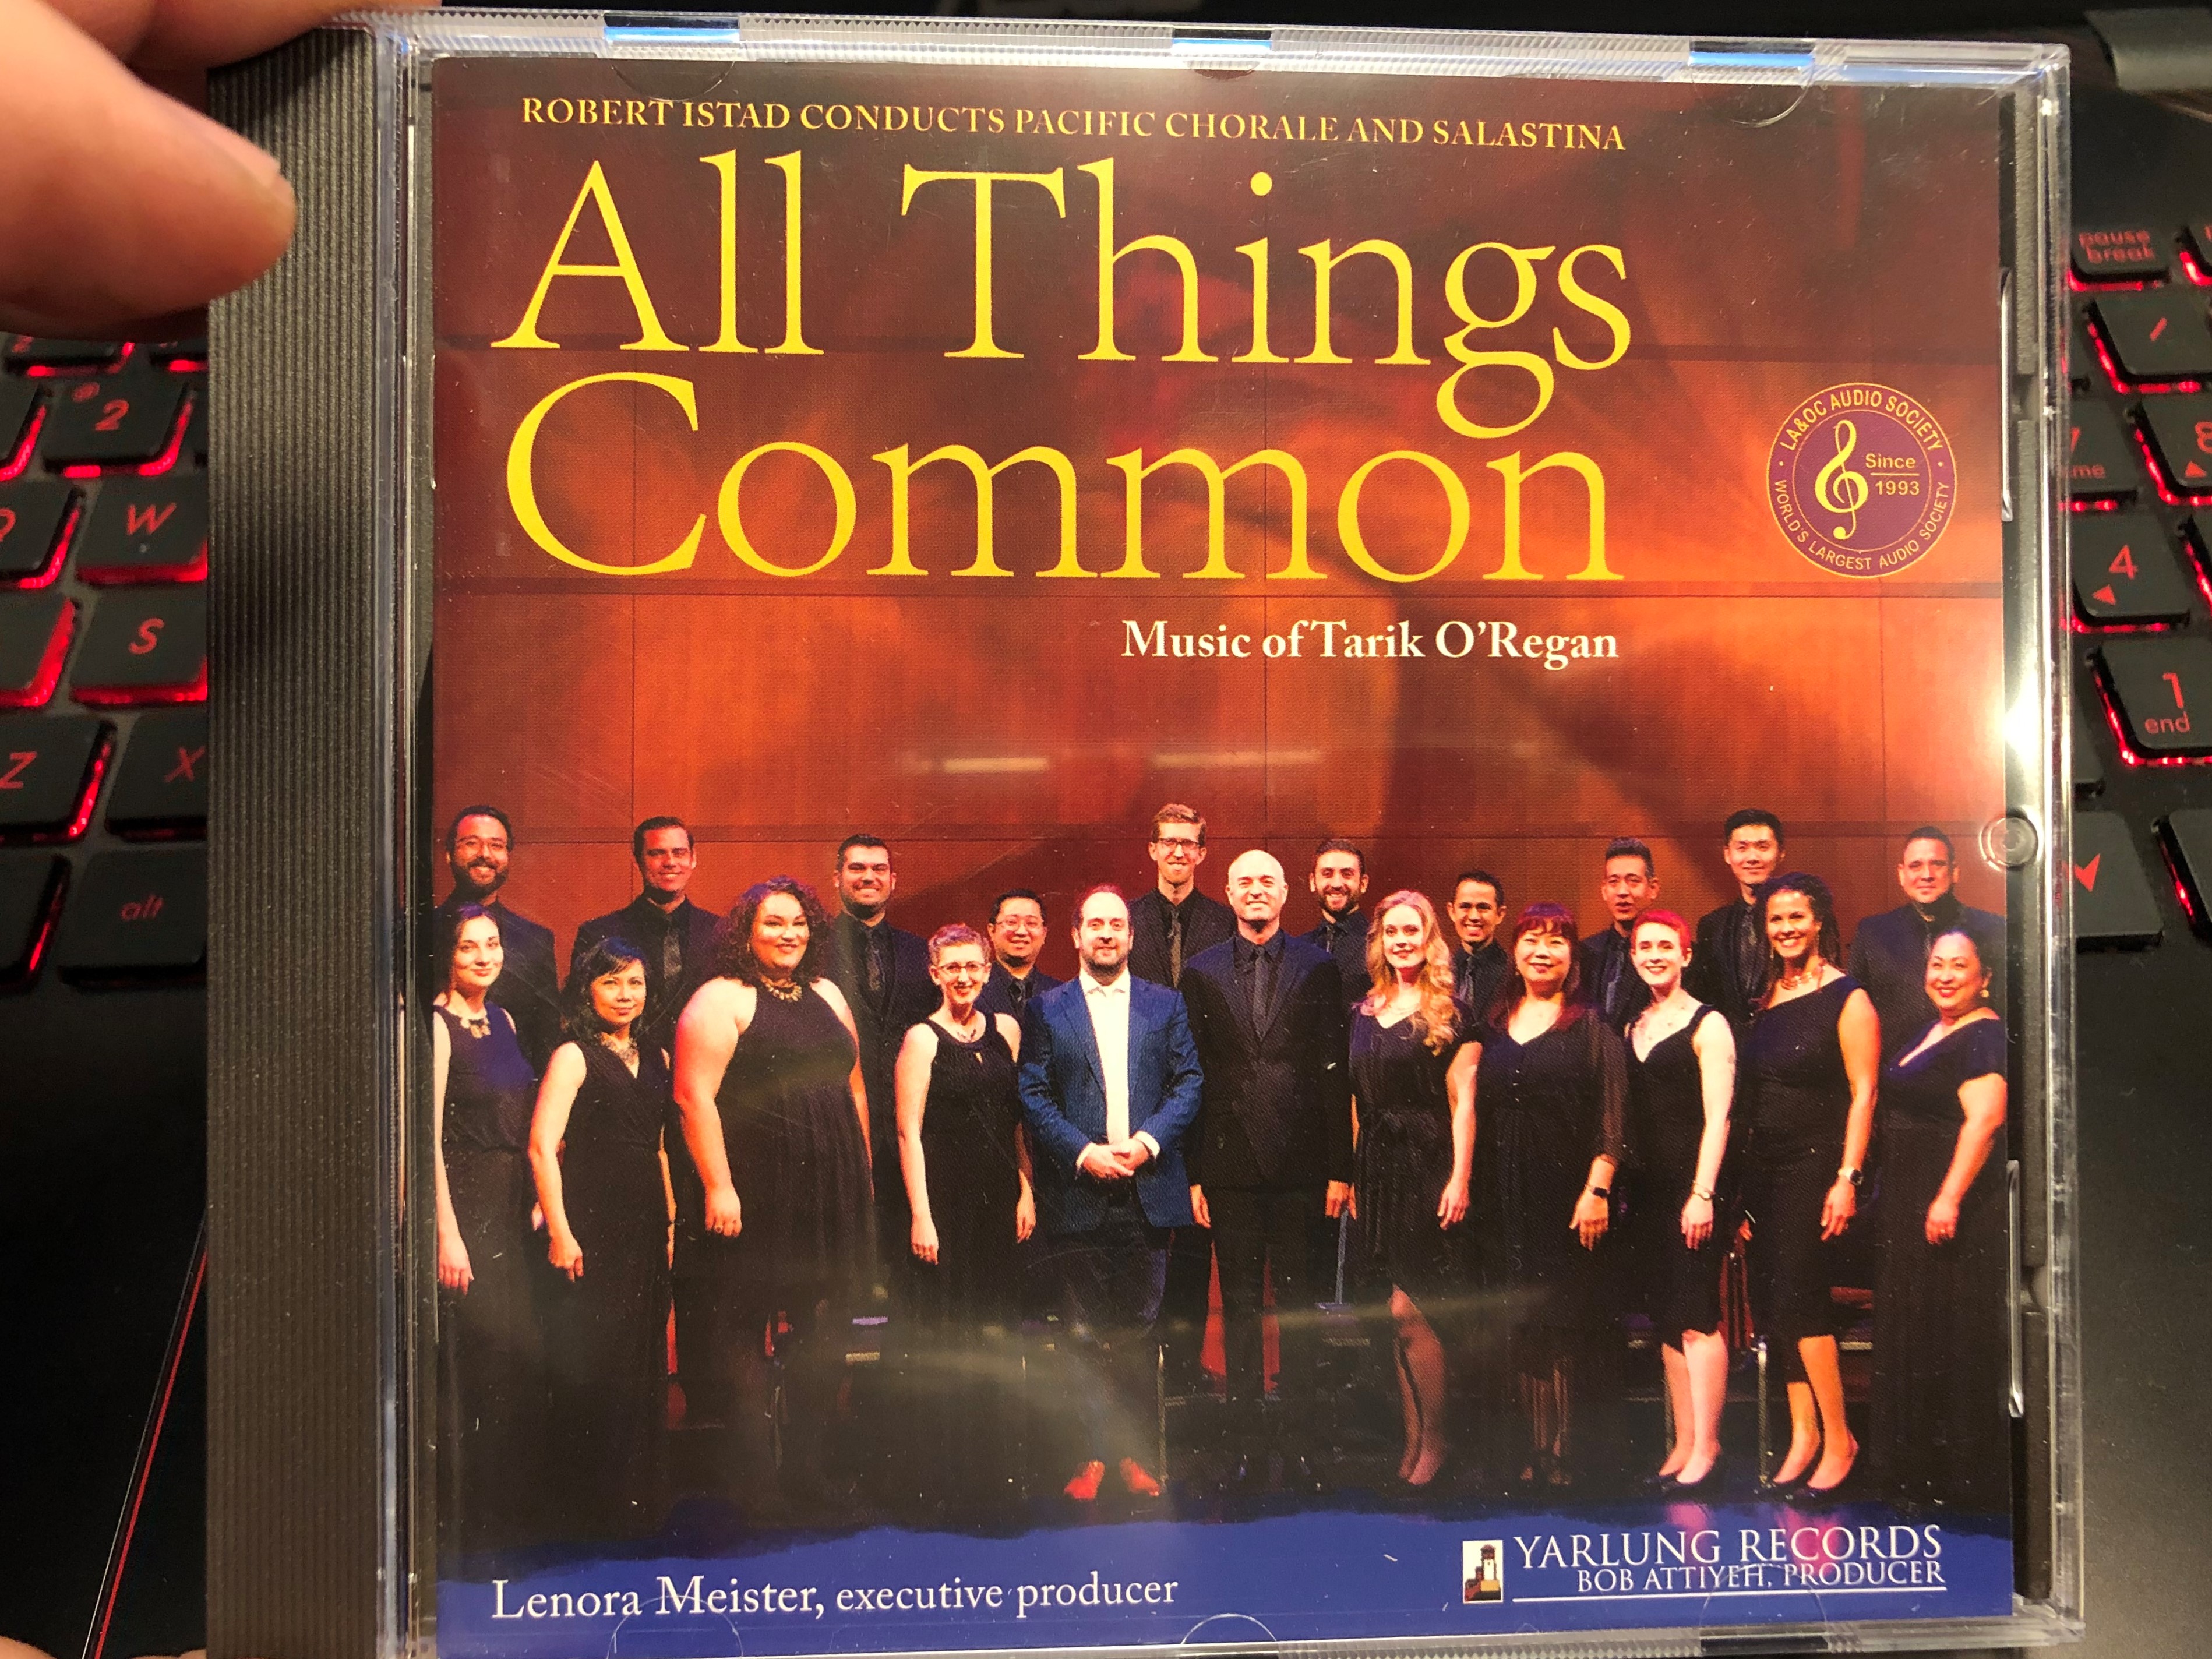 robert-istad-conducts-pacific-chorale-and-salastina-all-things-common-music-of-tarik-o-regan-lenora-meister-executive-producer-yarlung-records-audio-cd-2020-yar02592-1-.jpg